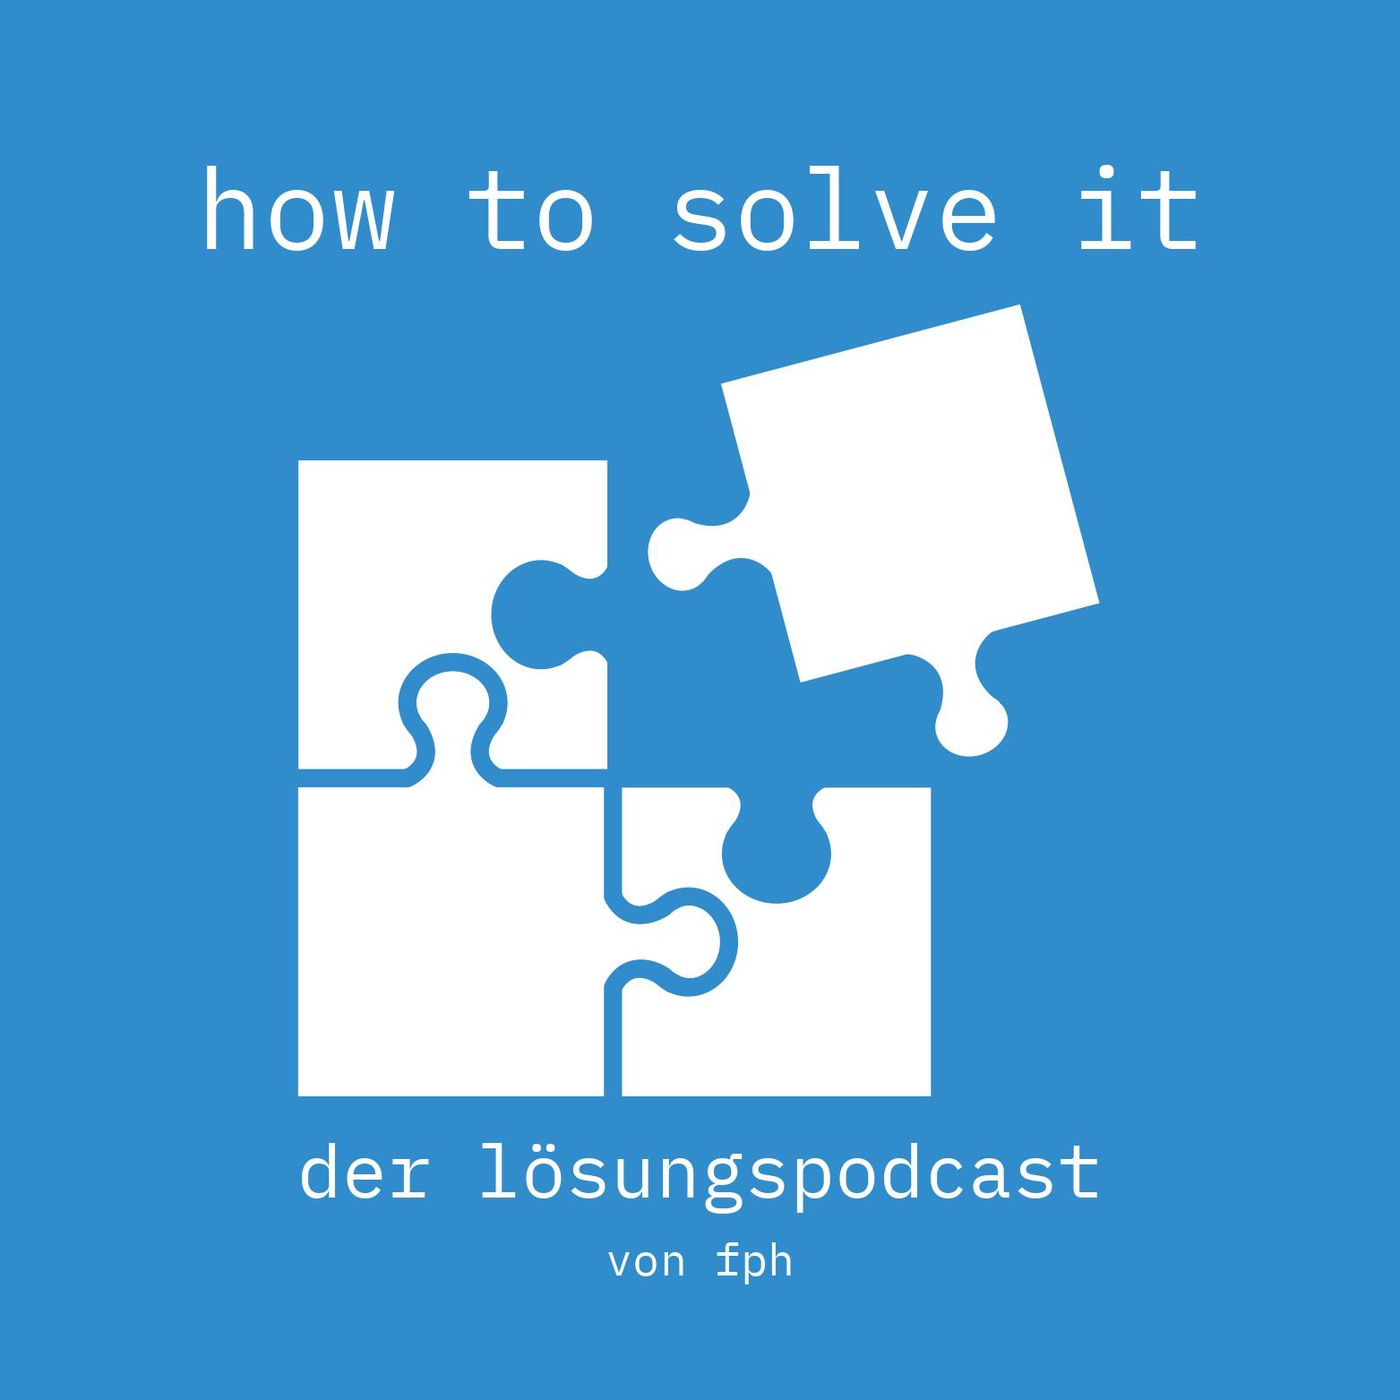 How to Solve It - Der Lösungspodcast